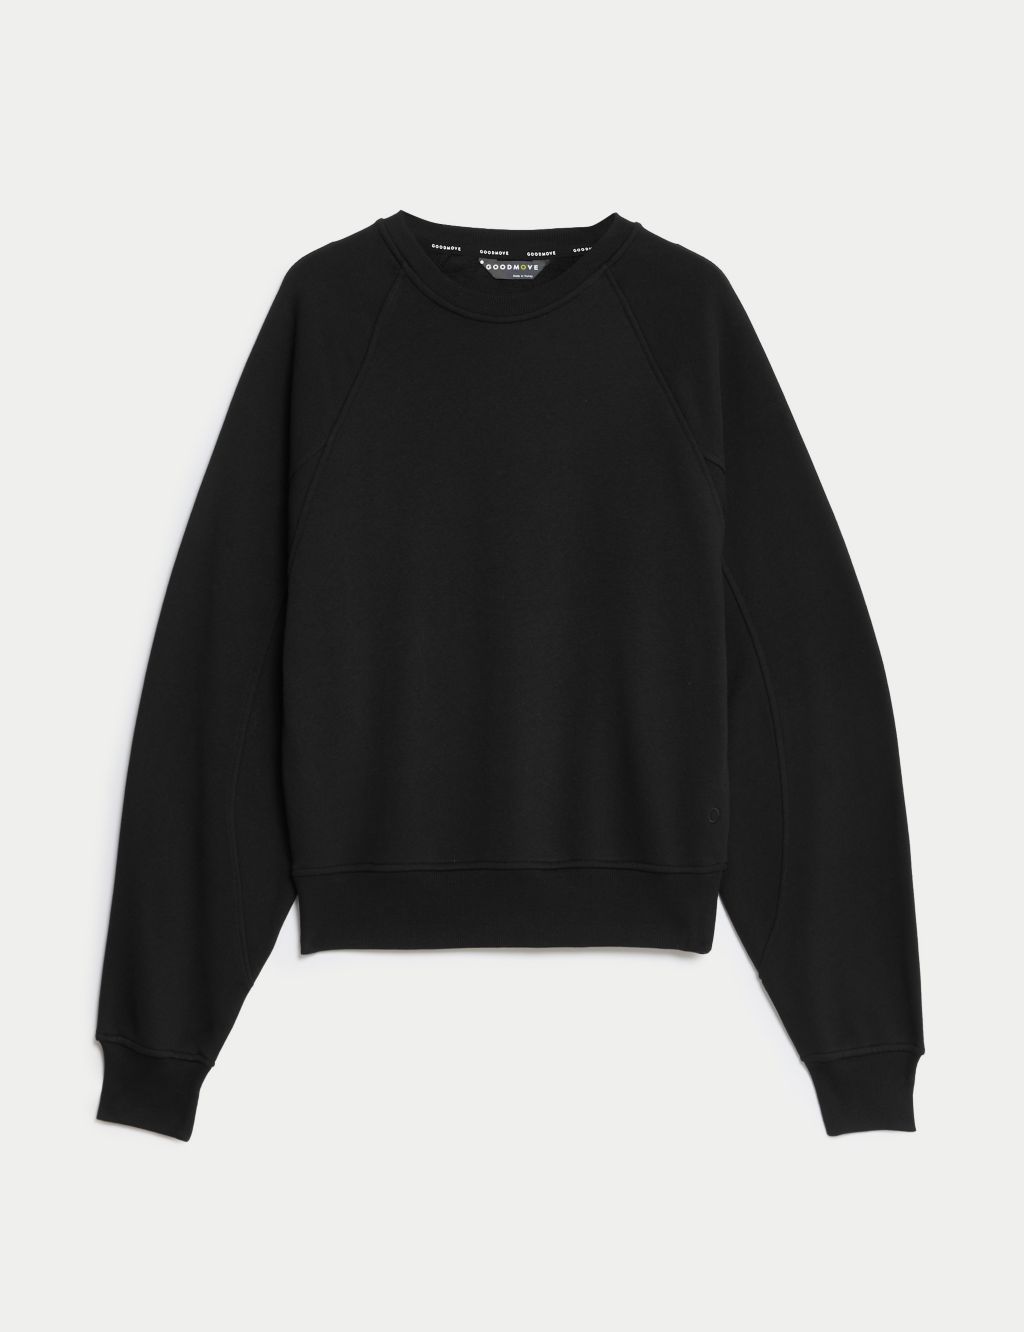 Cotton Rich Crew Neck Relaxed Sweatshirt image 2